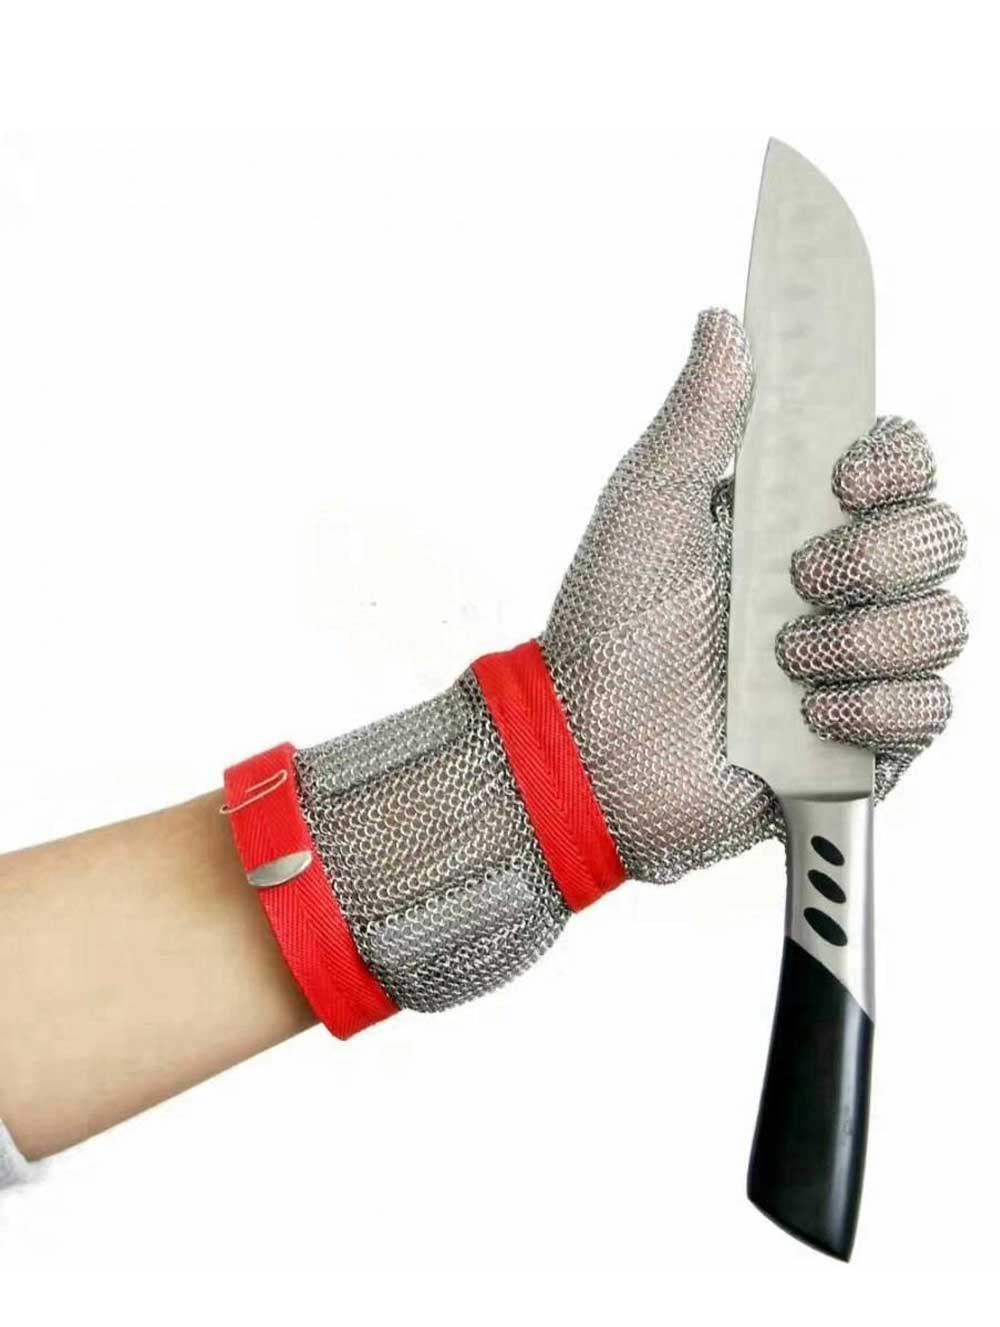 MK1101-Five Finger Wrist Stainless Steel Glove With Extended Textile Cuff 